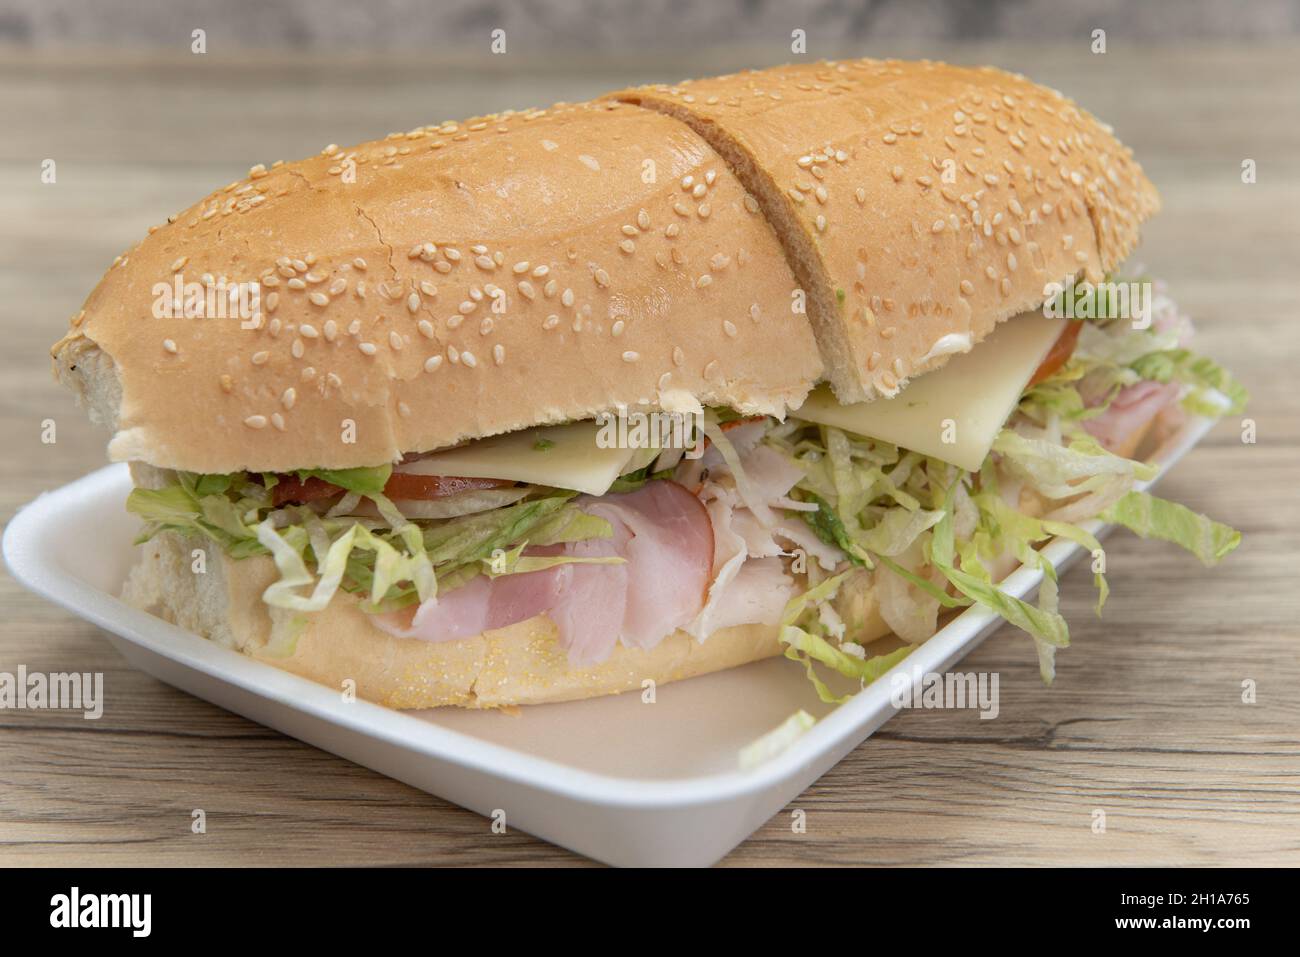 Handmade from fresh ingredients club sandwich with turkey, ham, swiss cheese, lettuce, bacon, and tomatoes, in a oven baked bun. Stock Photo